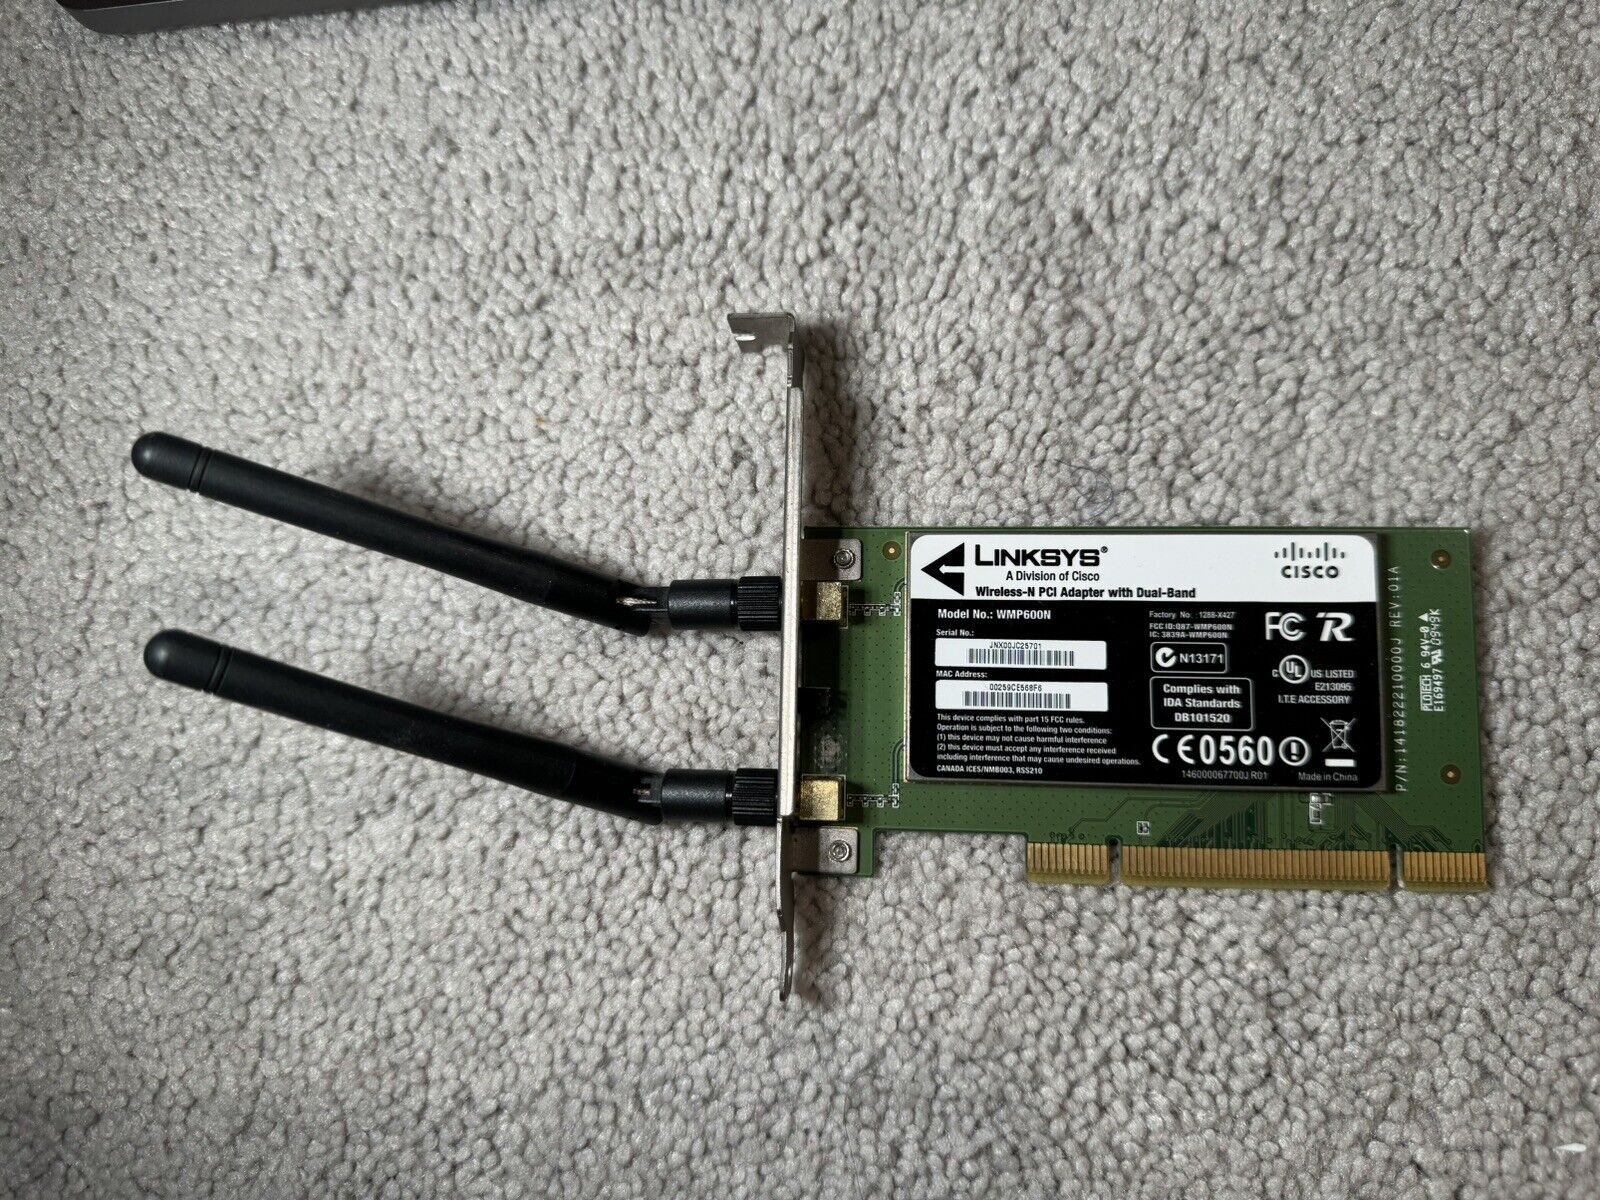 Linksys Cisco Wireless-N Card PCI Dual Band Network Card WMP600N With Antennas